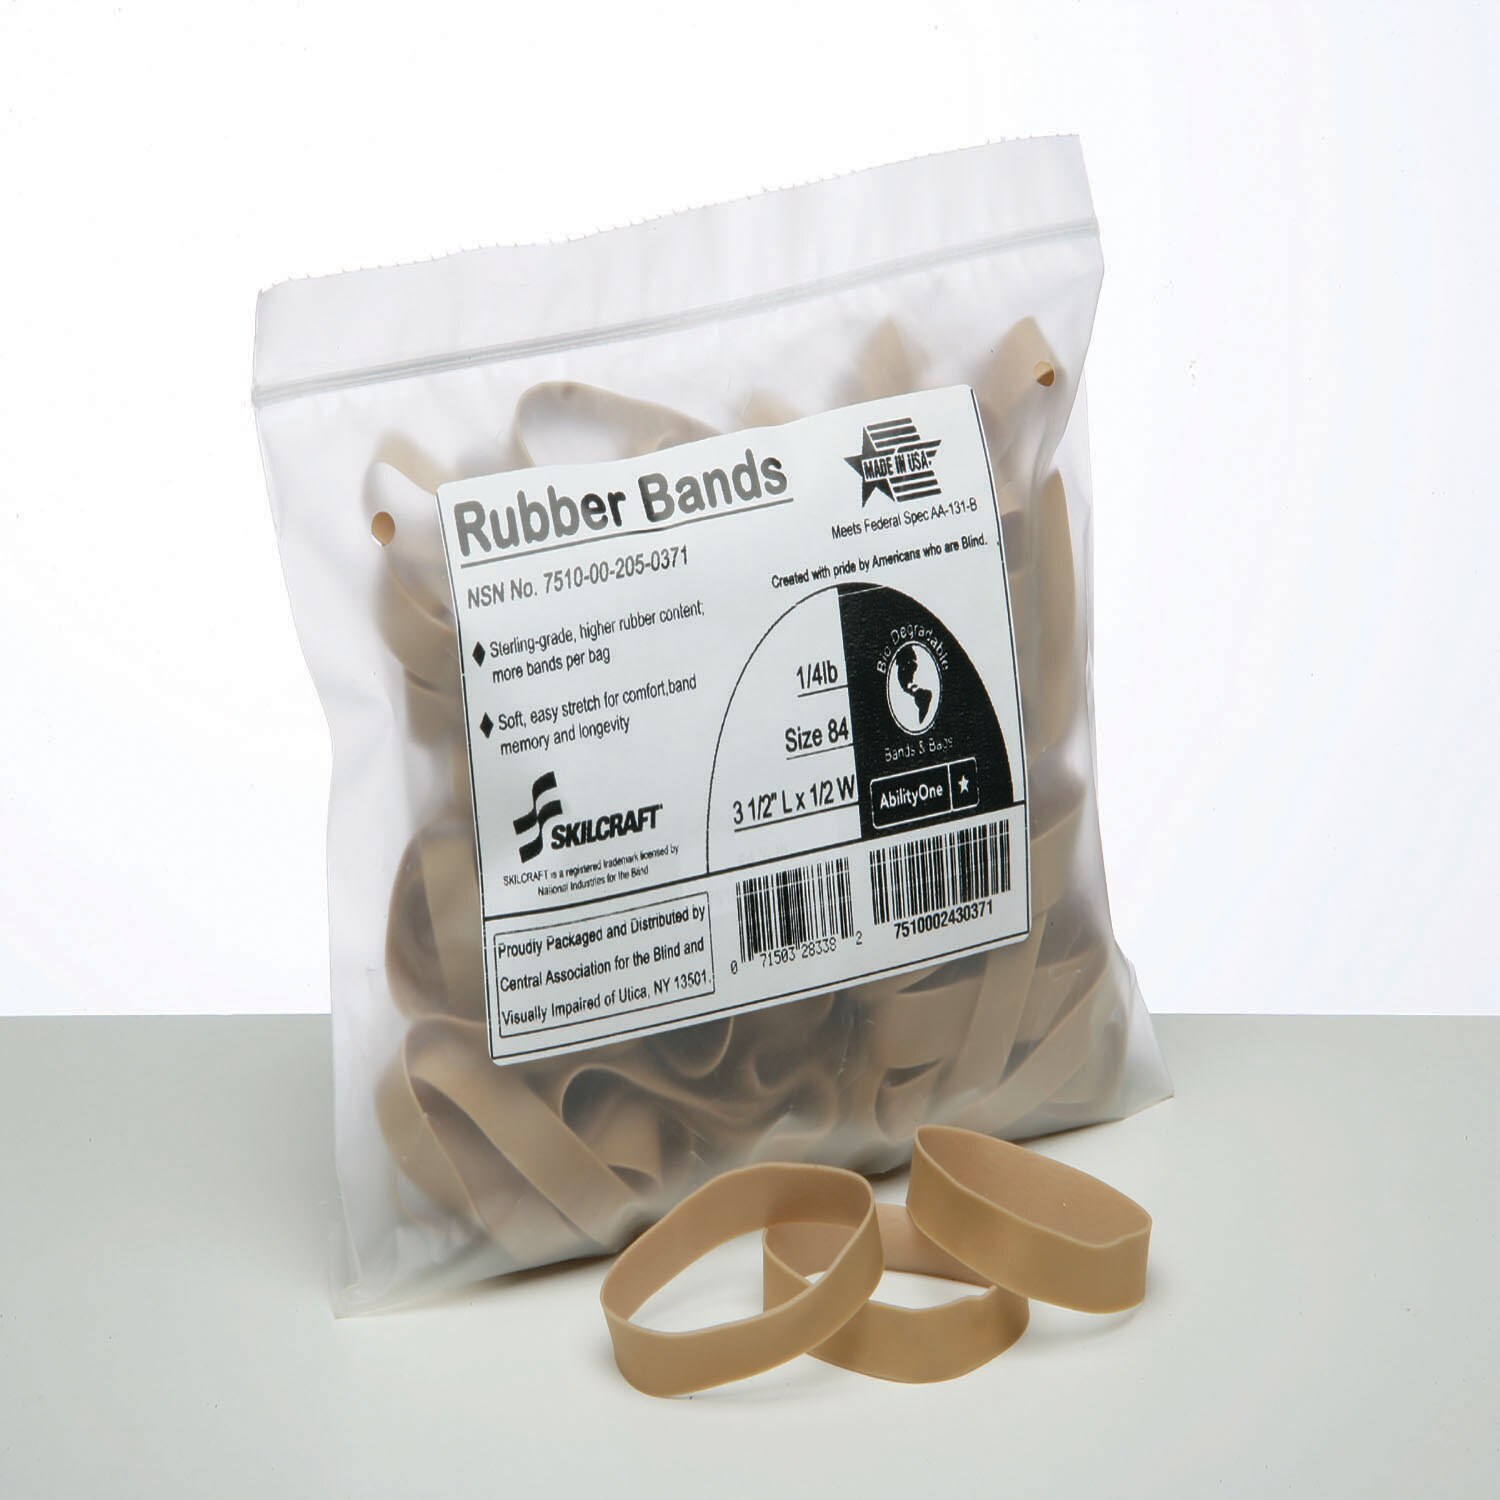 Rubber Band, Sterling Grade, Size 84, 1/4 lb